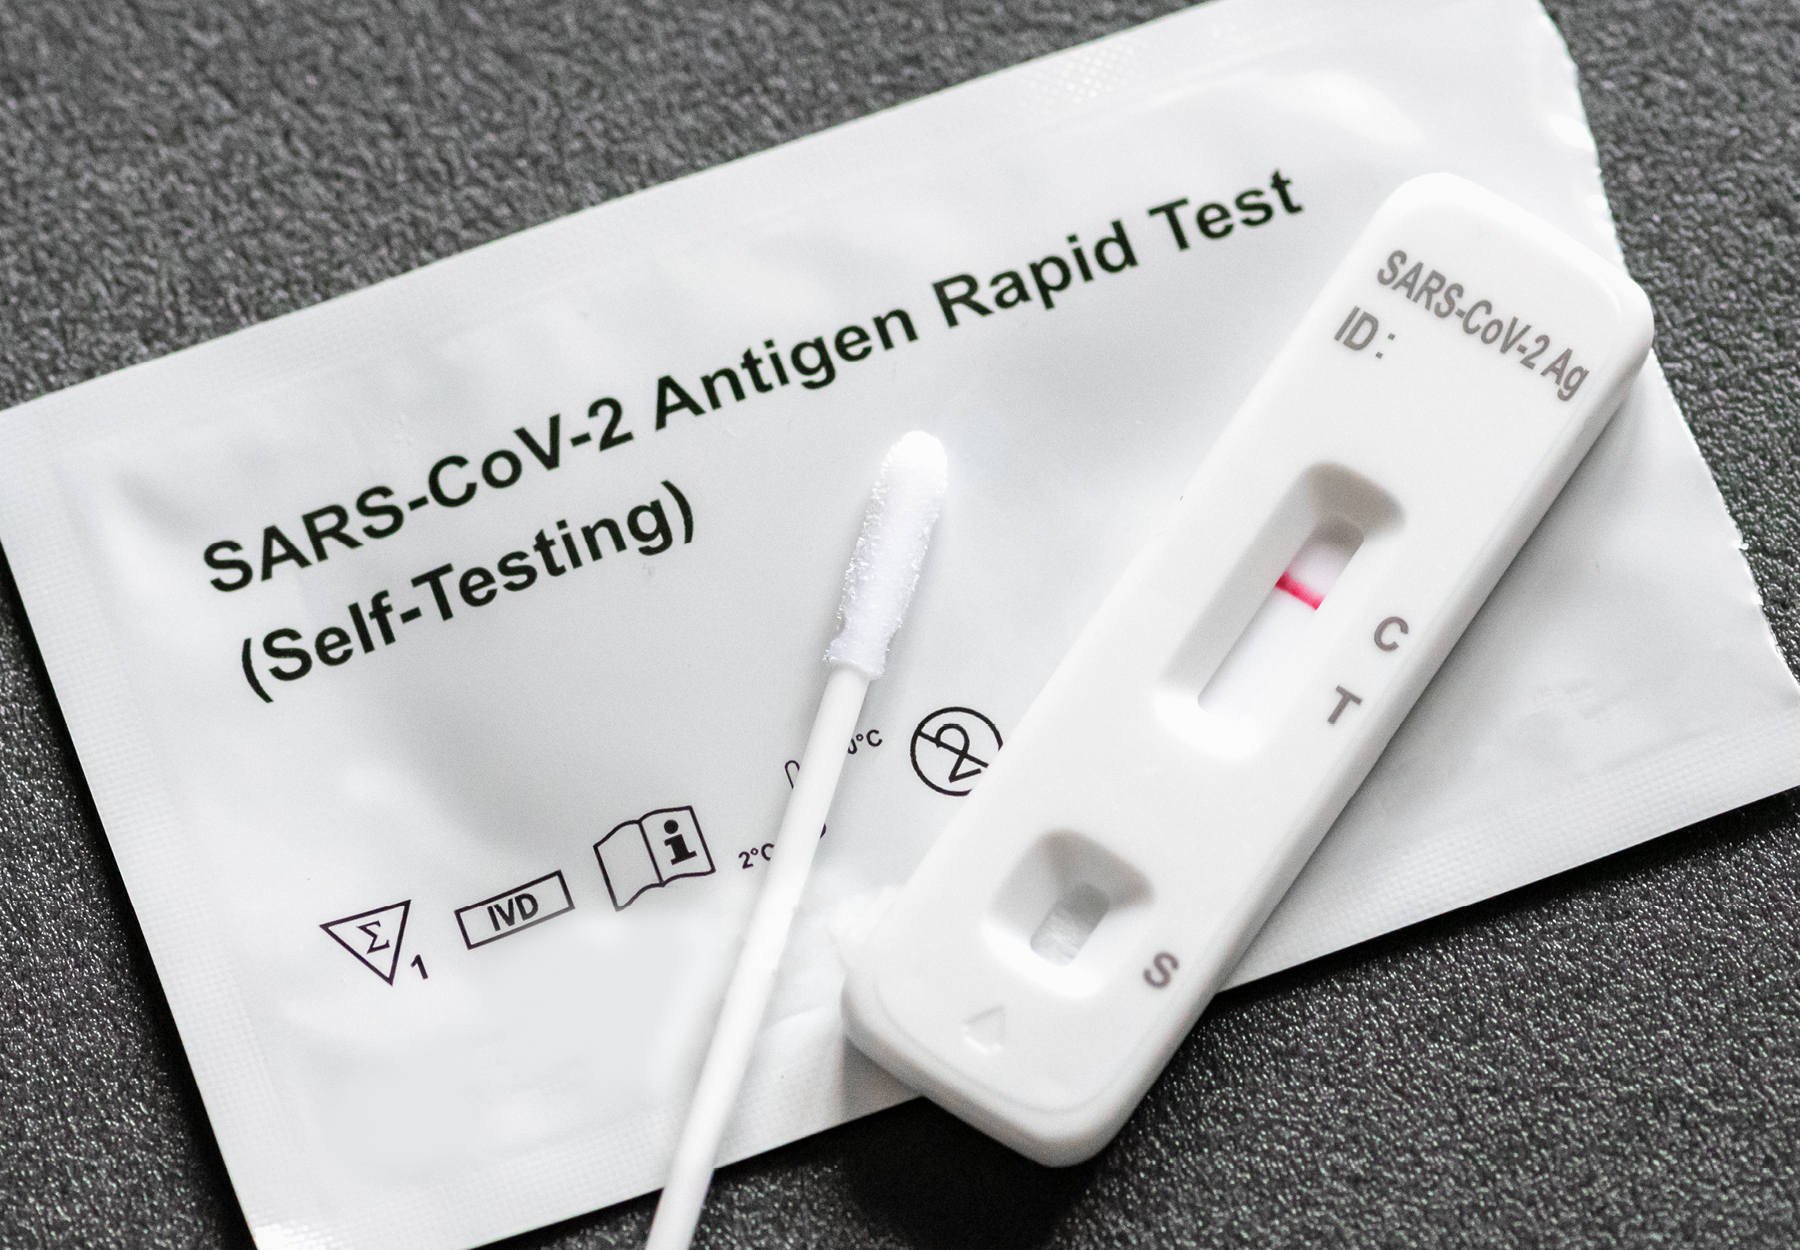 A stock image of a SARS-CoV-2 antigen rapid test next to a swab.